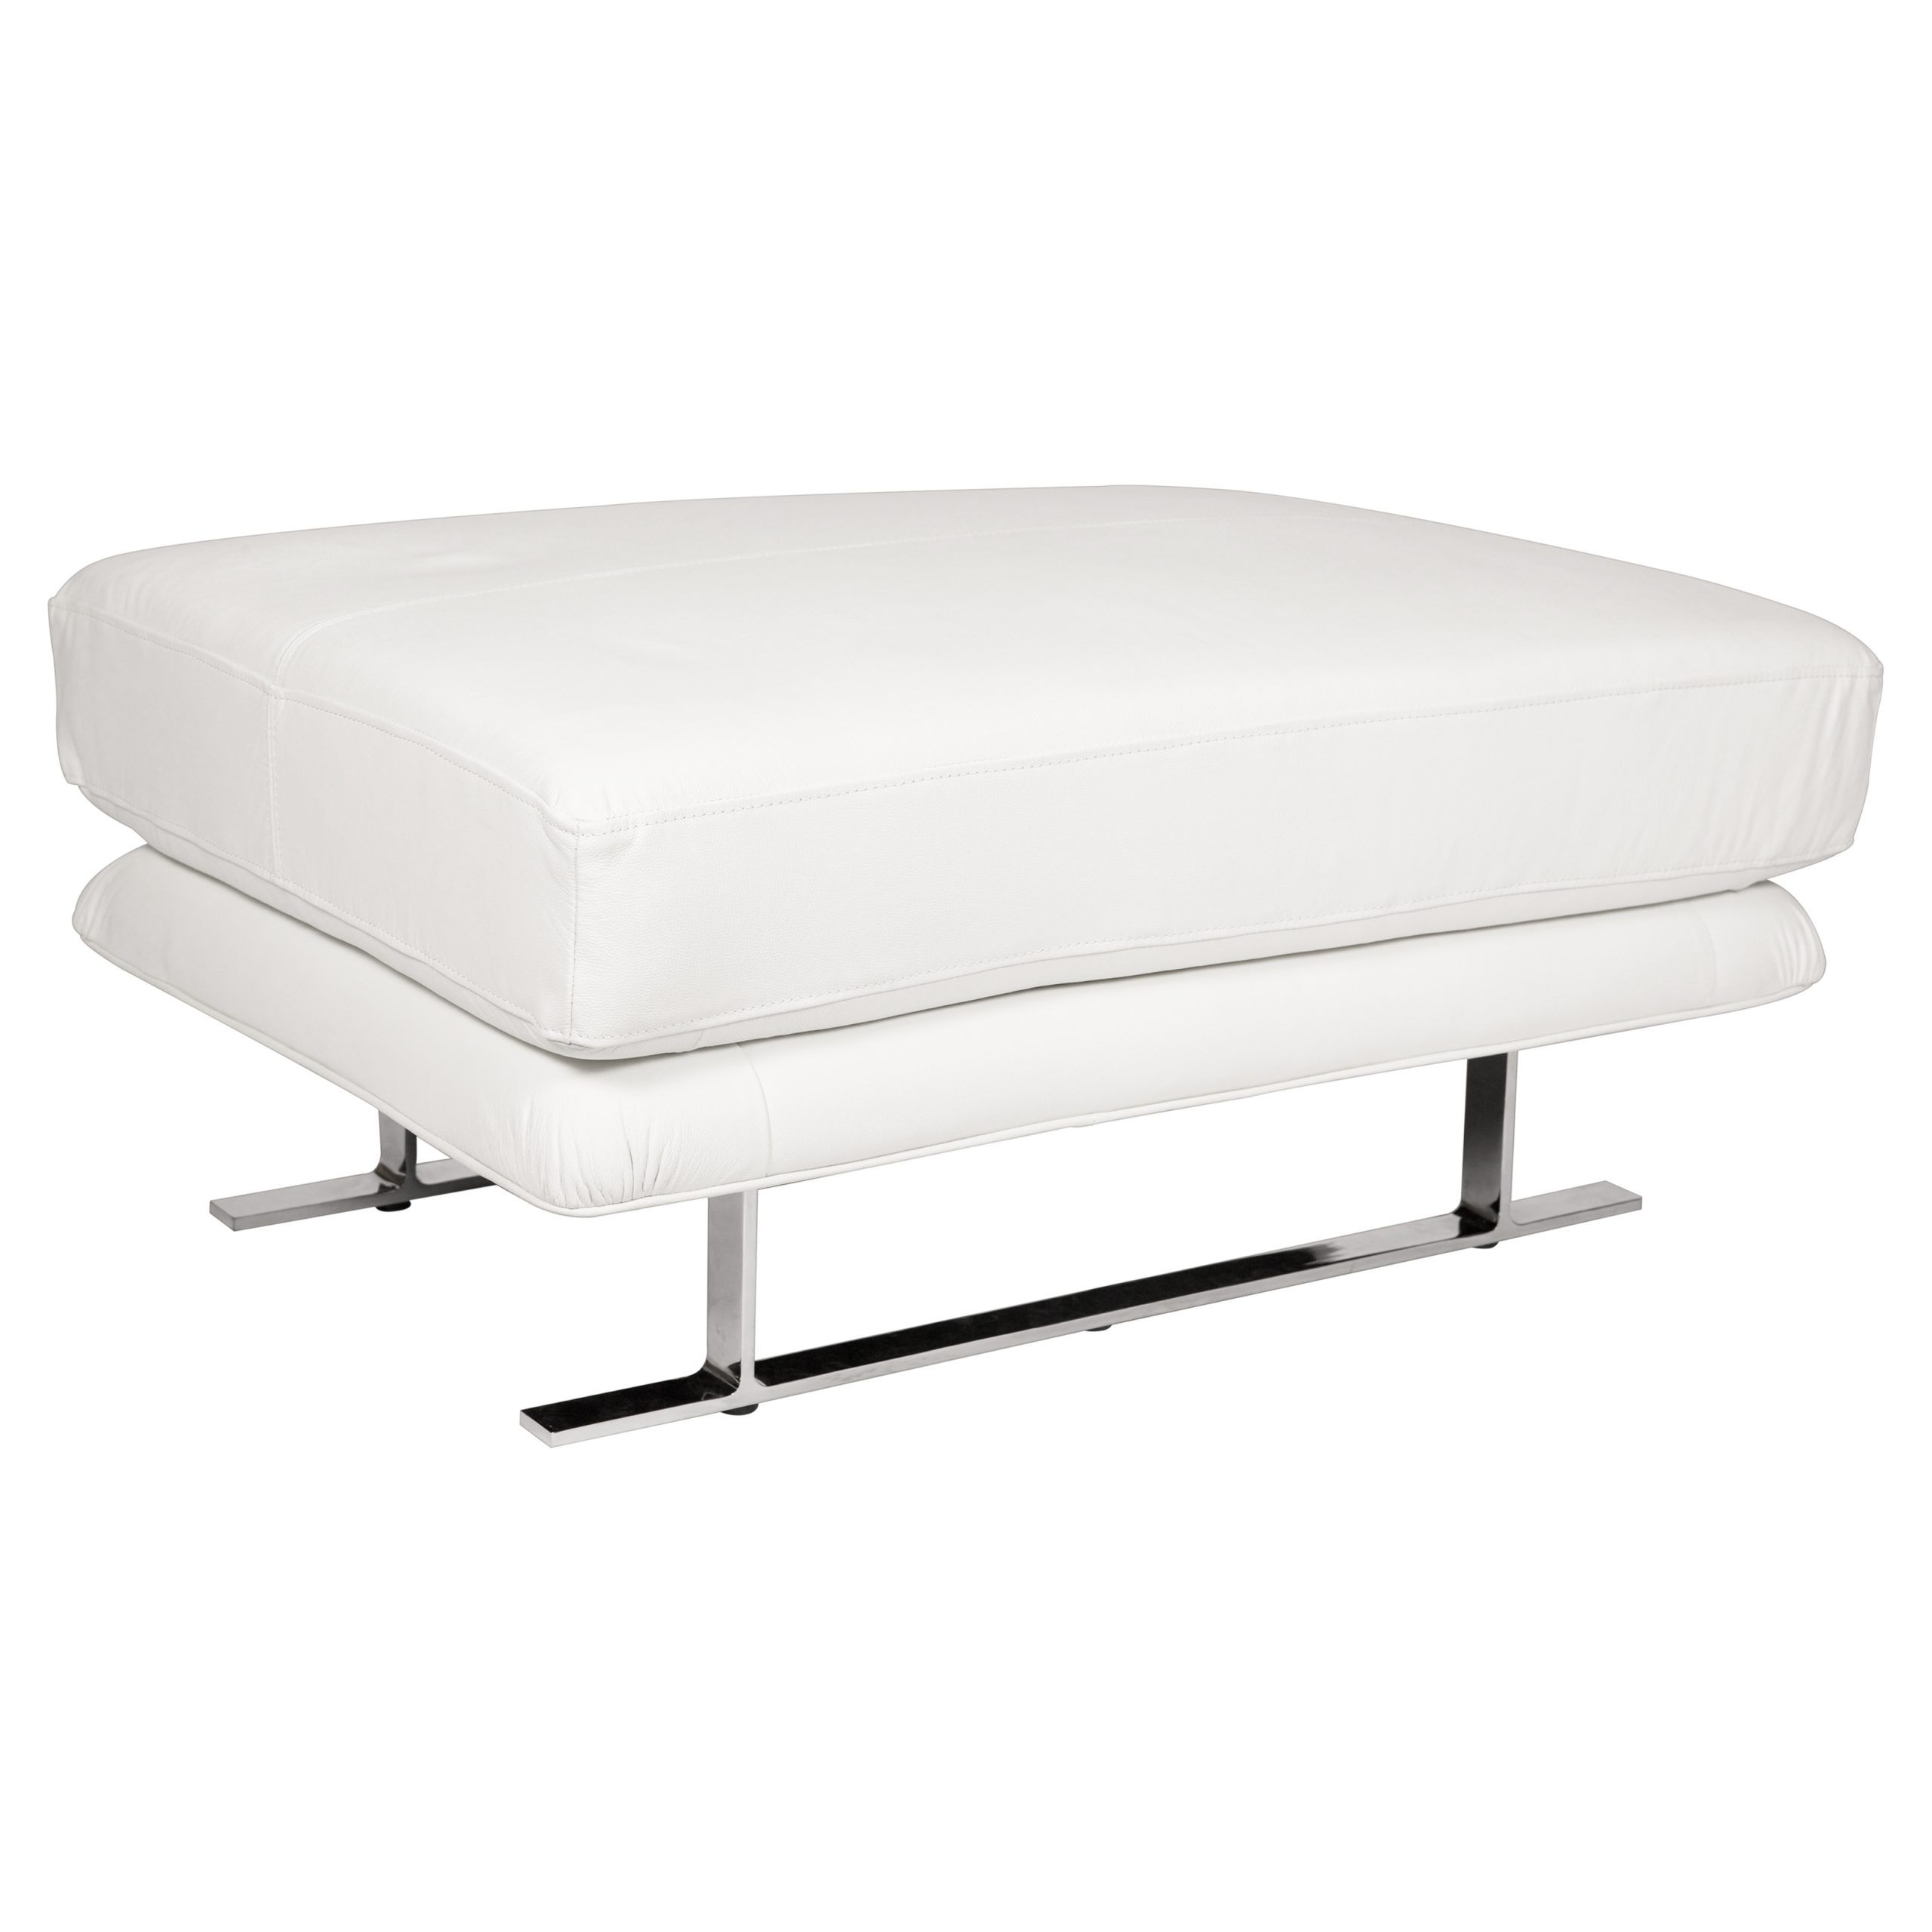 Savoy Leather Ottoman With Chrome Legs – White At Hayneedle Inside White Leatherette Ottomans (View 8 of 20)